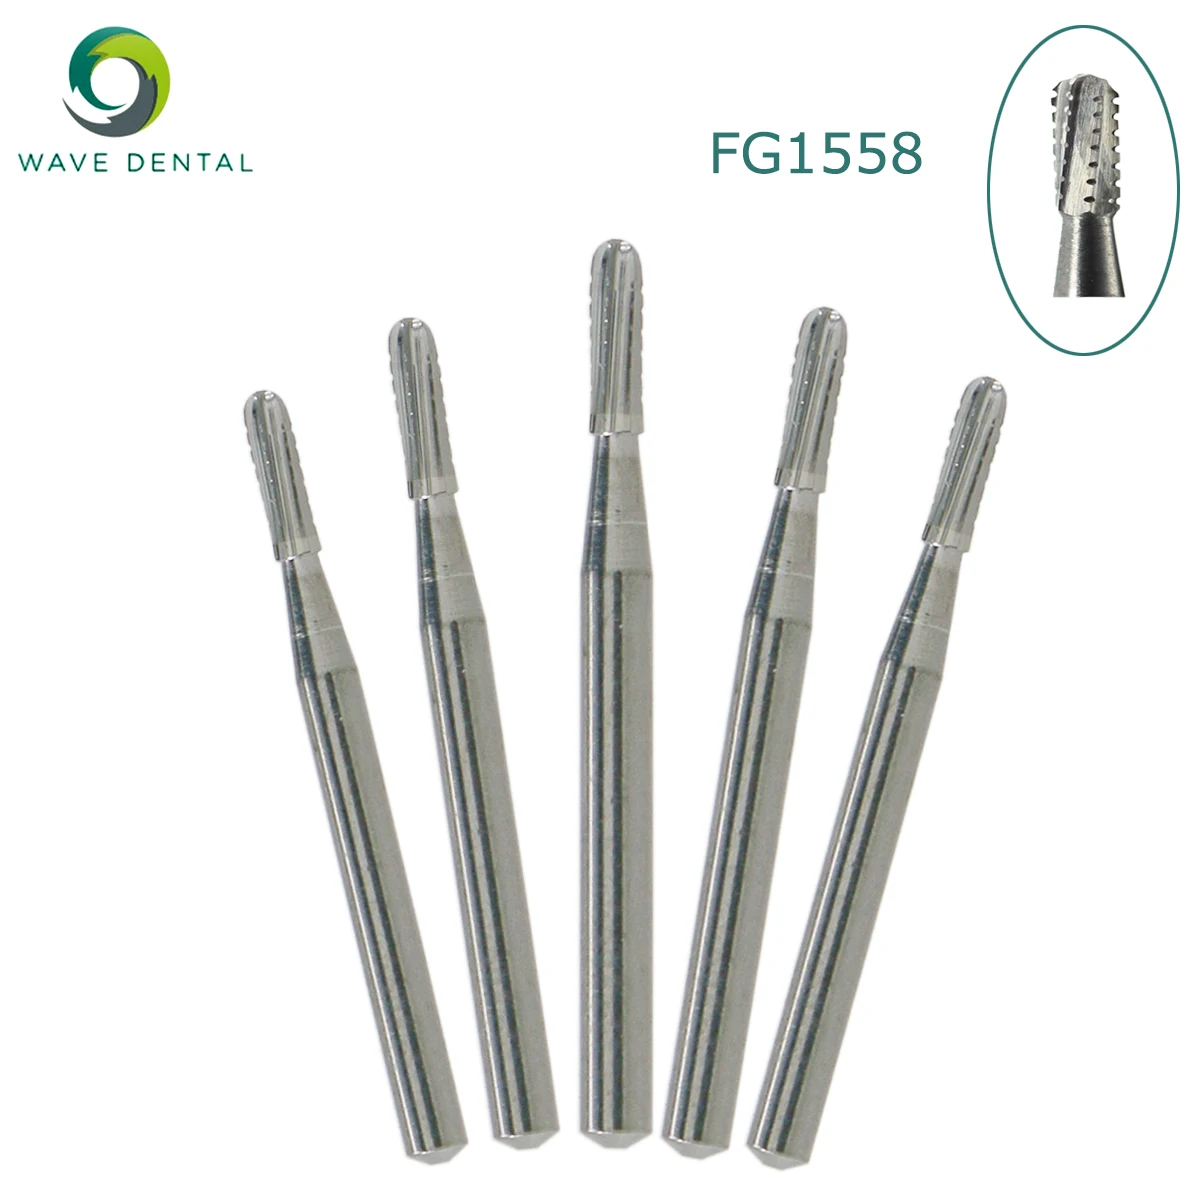 

WAVE Dental Tungsten Carbide Burs Straight Fissure Head With Rounded End Cross Cut for Dental Drill Bits High Speed Handpiece